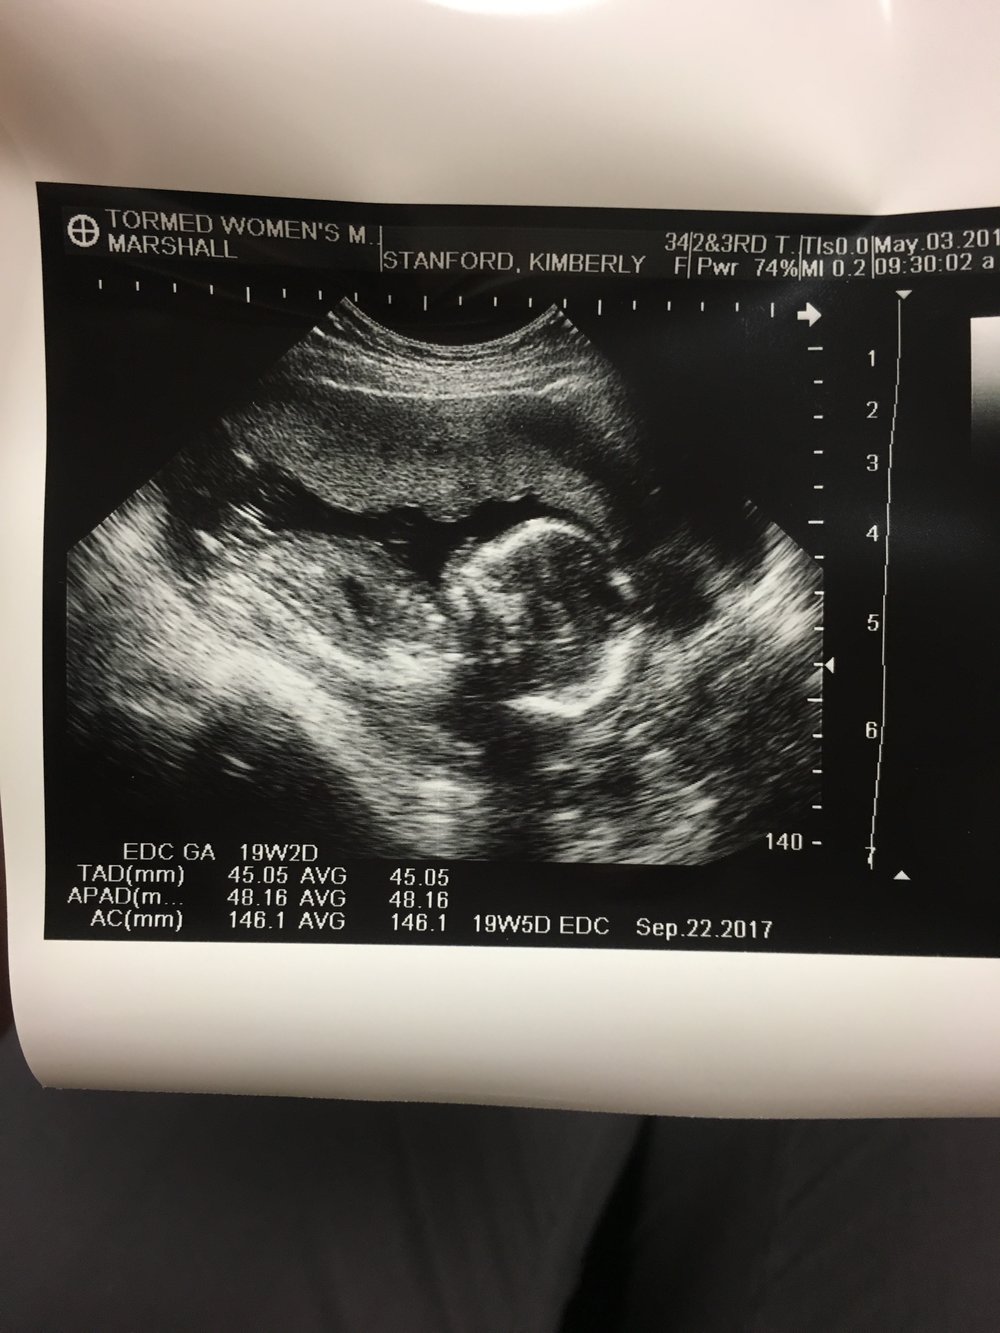  Baby Girl's anatomy scan at 19 weeks 